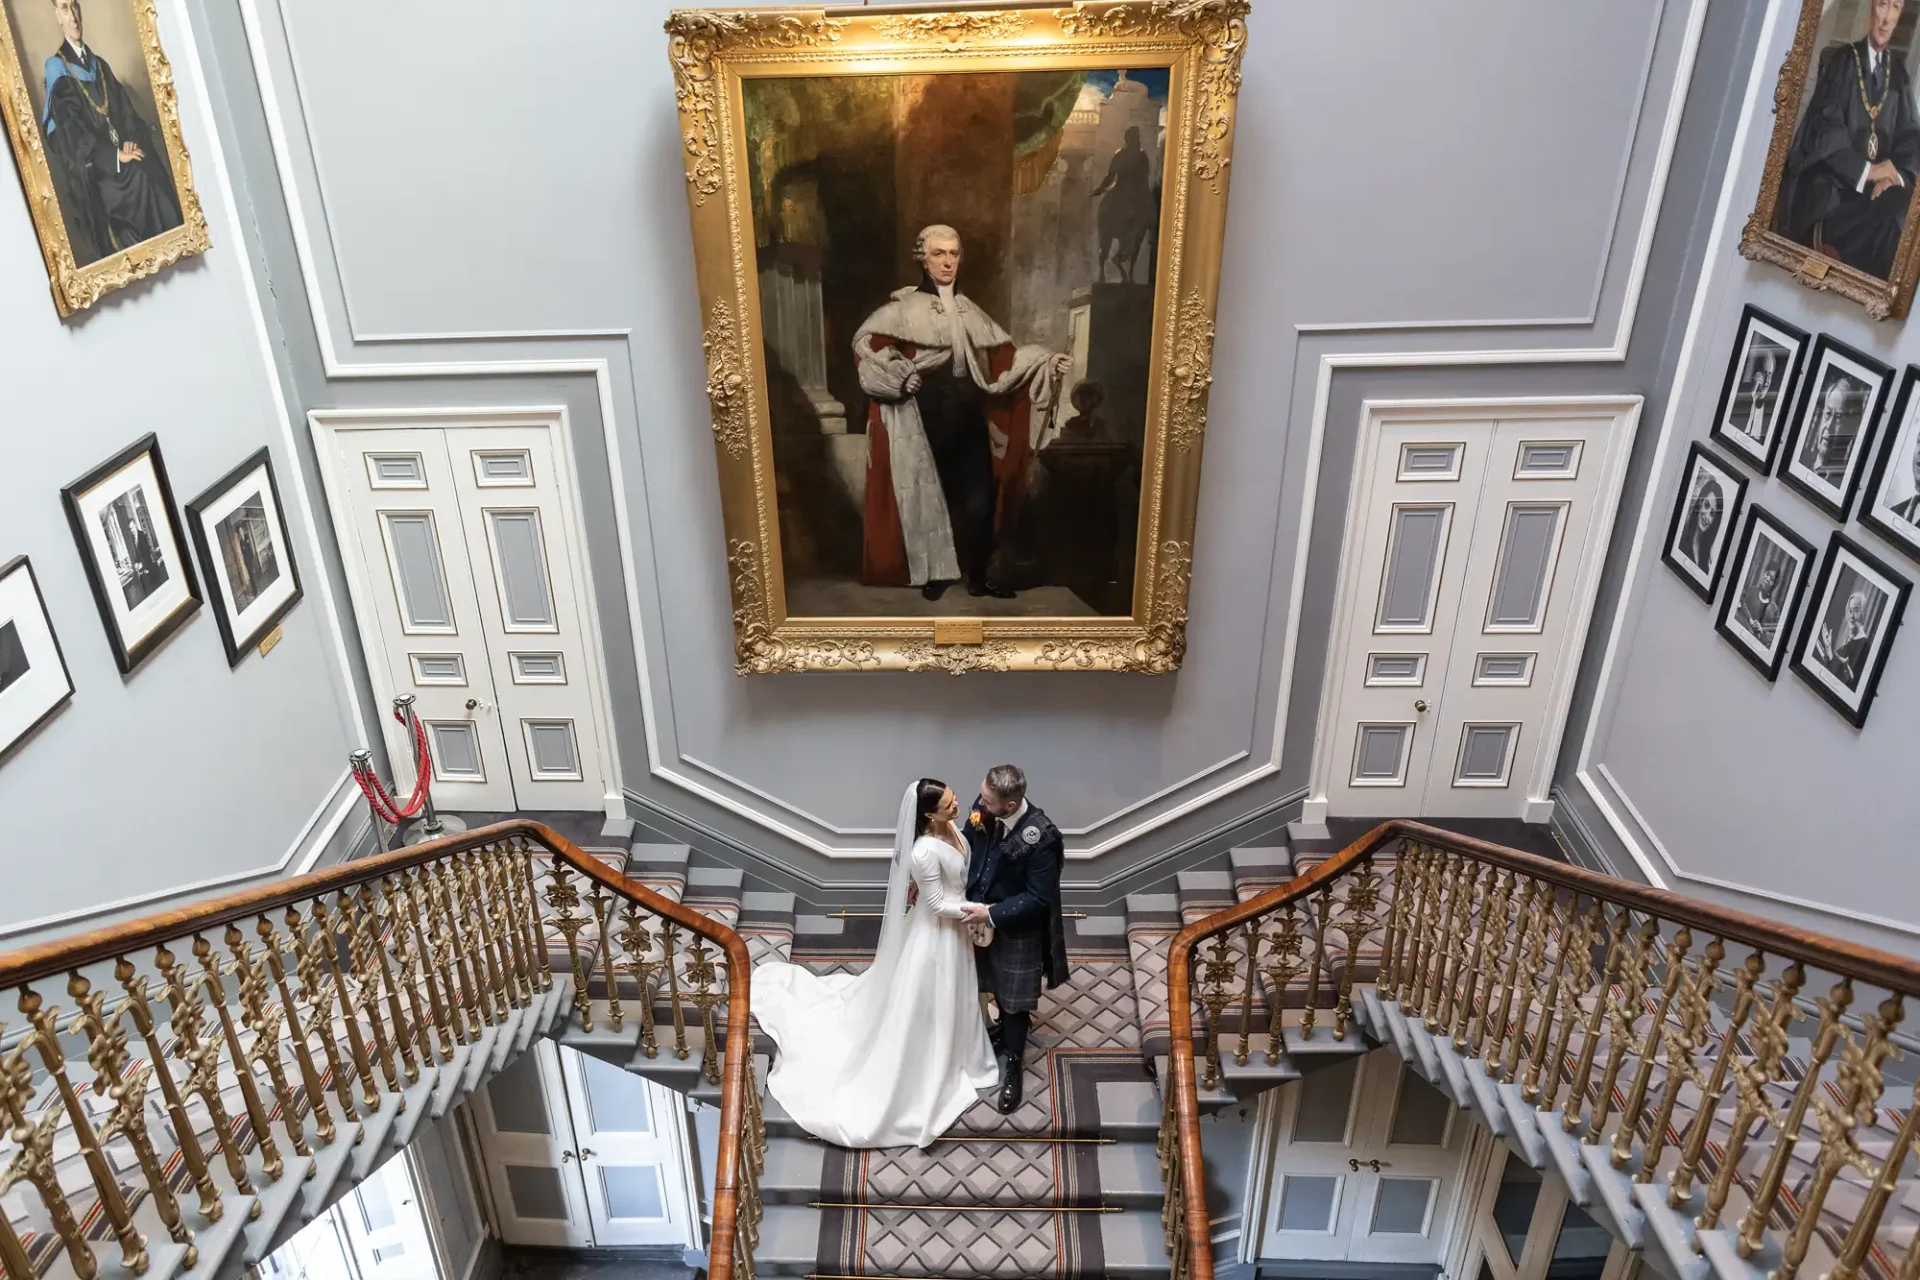 A bride and groom holding hands stand at the base of a grand staircase, flanked by classical paintings in an elegant hall.